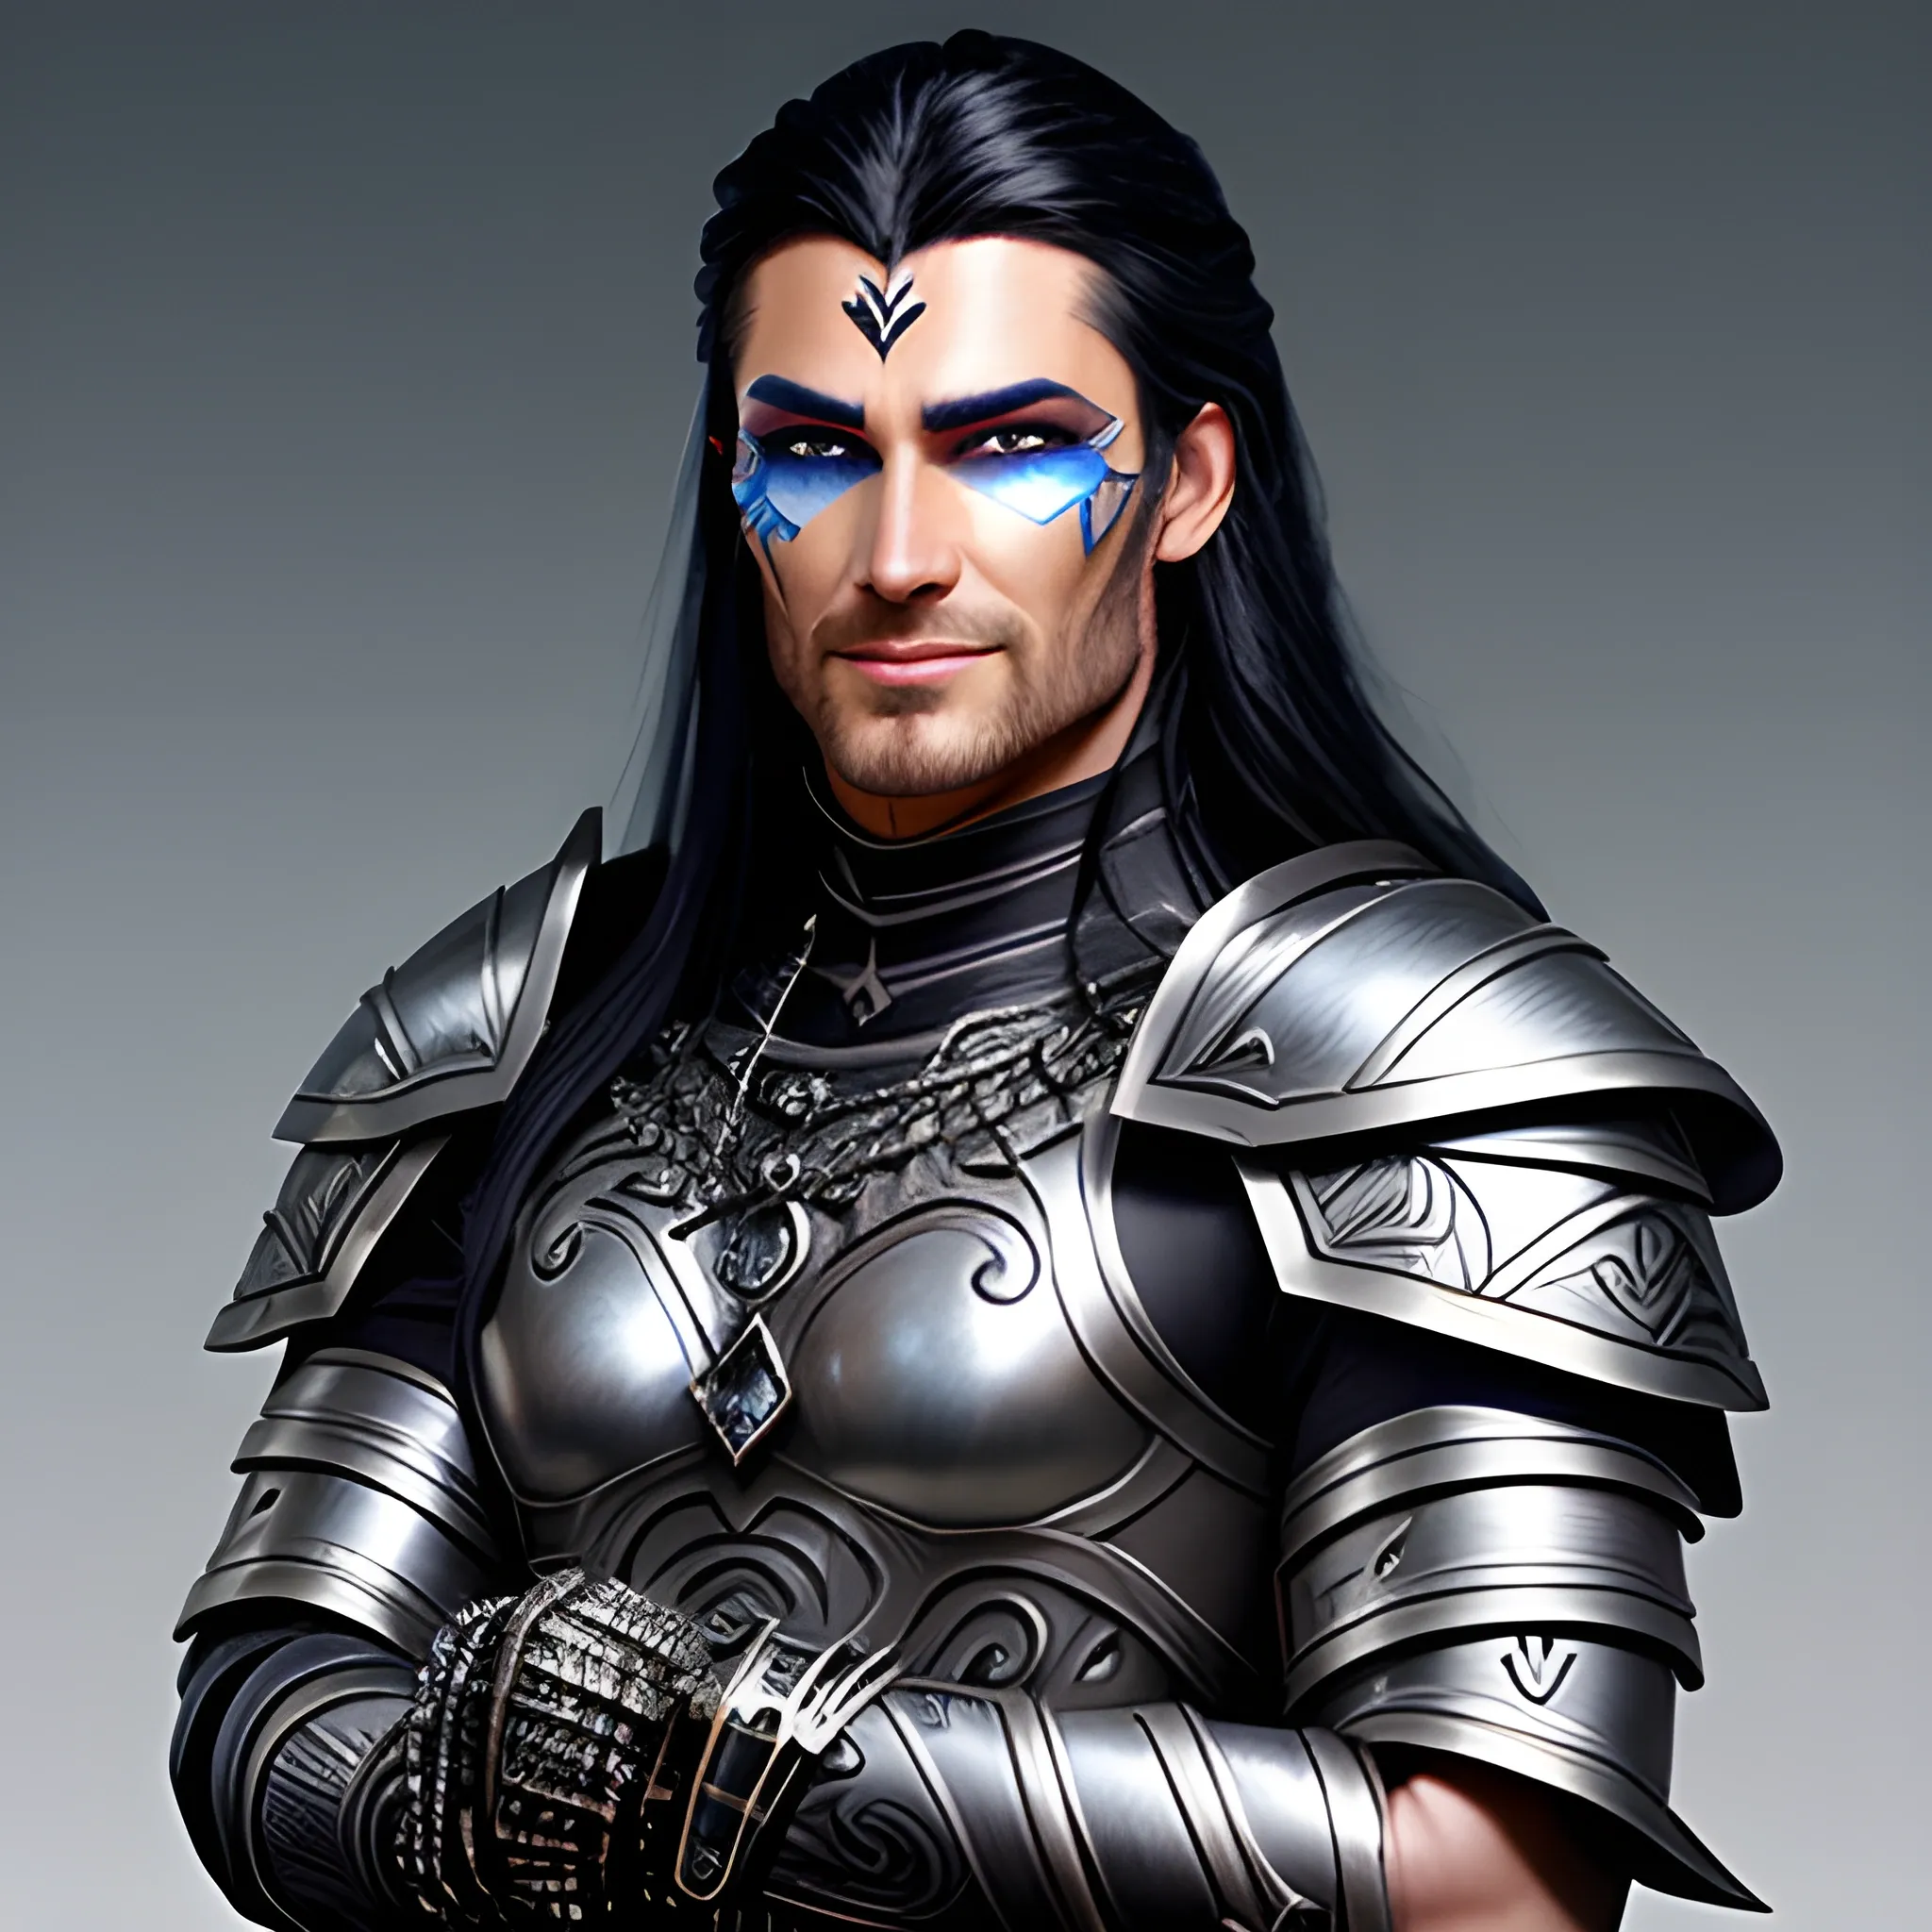 fantasy, paladin, warrior, metal skin, male, long black hair, icy eyes, blue eyes, intricate light silver armor, smiling, hyper realistic, dungeons and dragons, strong, armed, black hair, Oil Painting, filigree skin, silver skin, silver flame necklace, grey skin, iron skin, platinum skin, human ears, Oil Painting, young, handsome, thin tribal facial tattoos, steel eyes, face tattoo, face scarring, aluminium skin, friendly, no helmet, happy, confident, black hair, grinning, good, warhammer, bust, generous, wielding weapon, holding fire